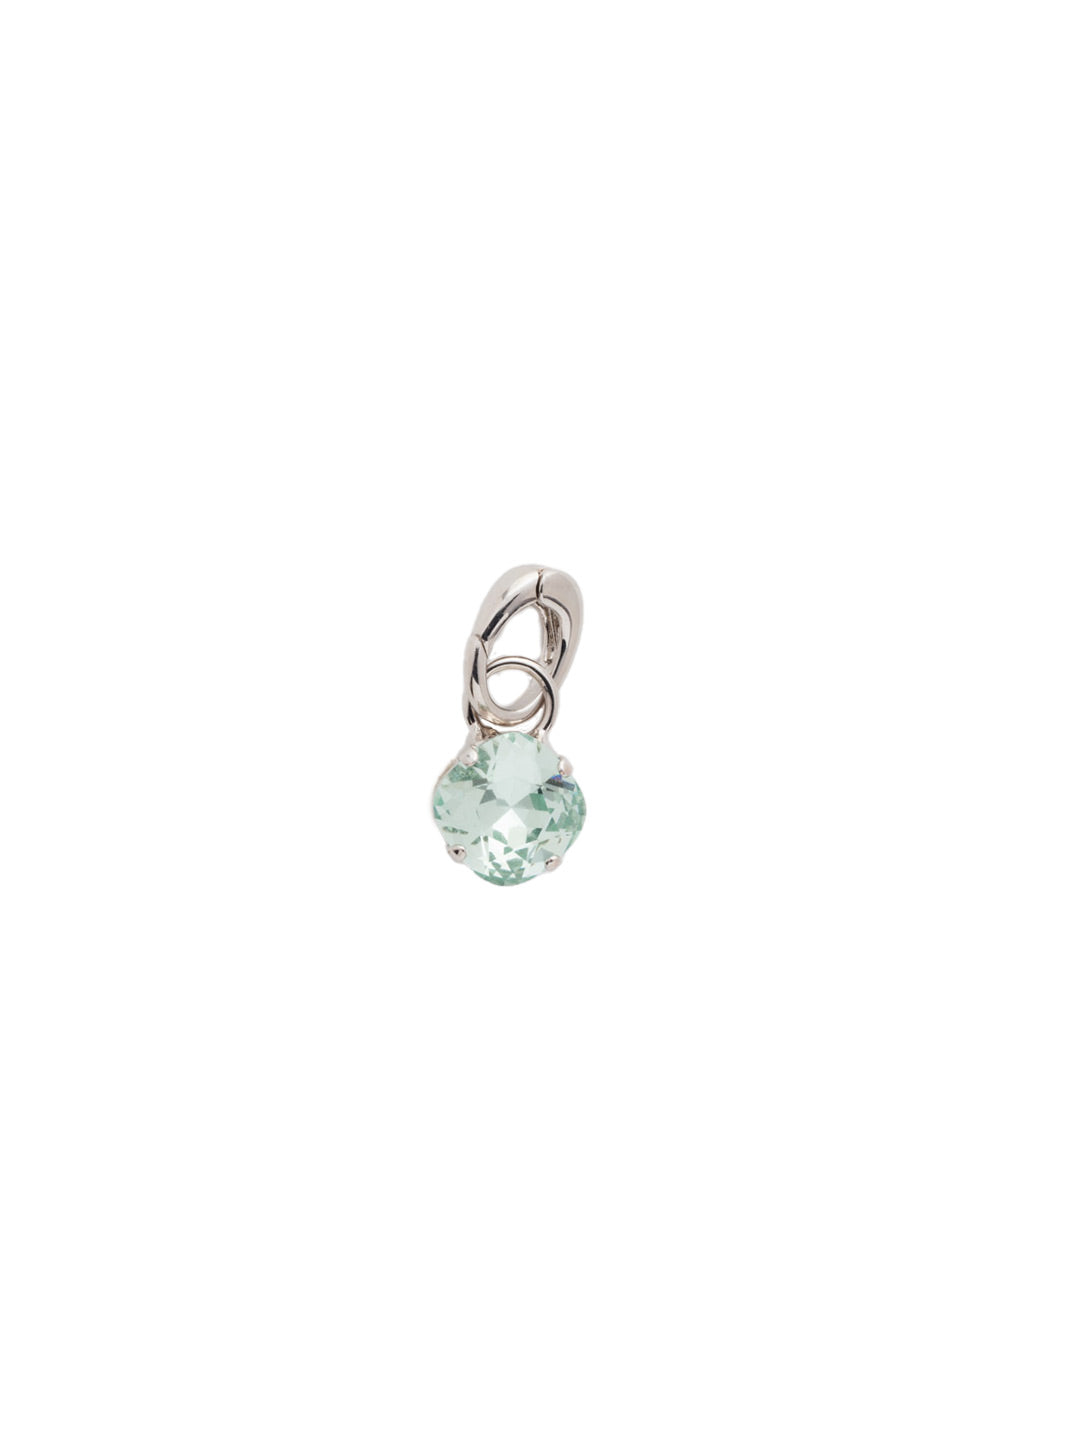 August Birthstone Mint Charm - CEU1RHMIN - <p>A cushion-cut crystal designed in your beautiful birthstone. Simply attach it to our favorite chain for an everyday look. From Sorrelli's Mint collection in our Palladium Silver-tone finish.</p>